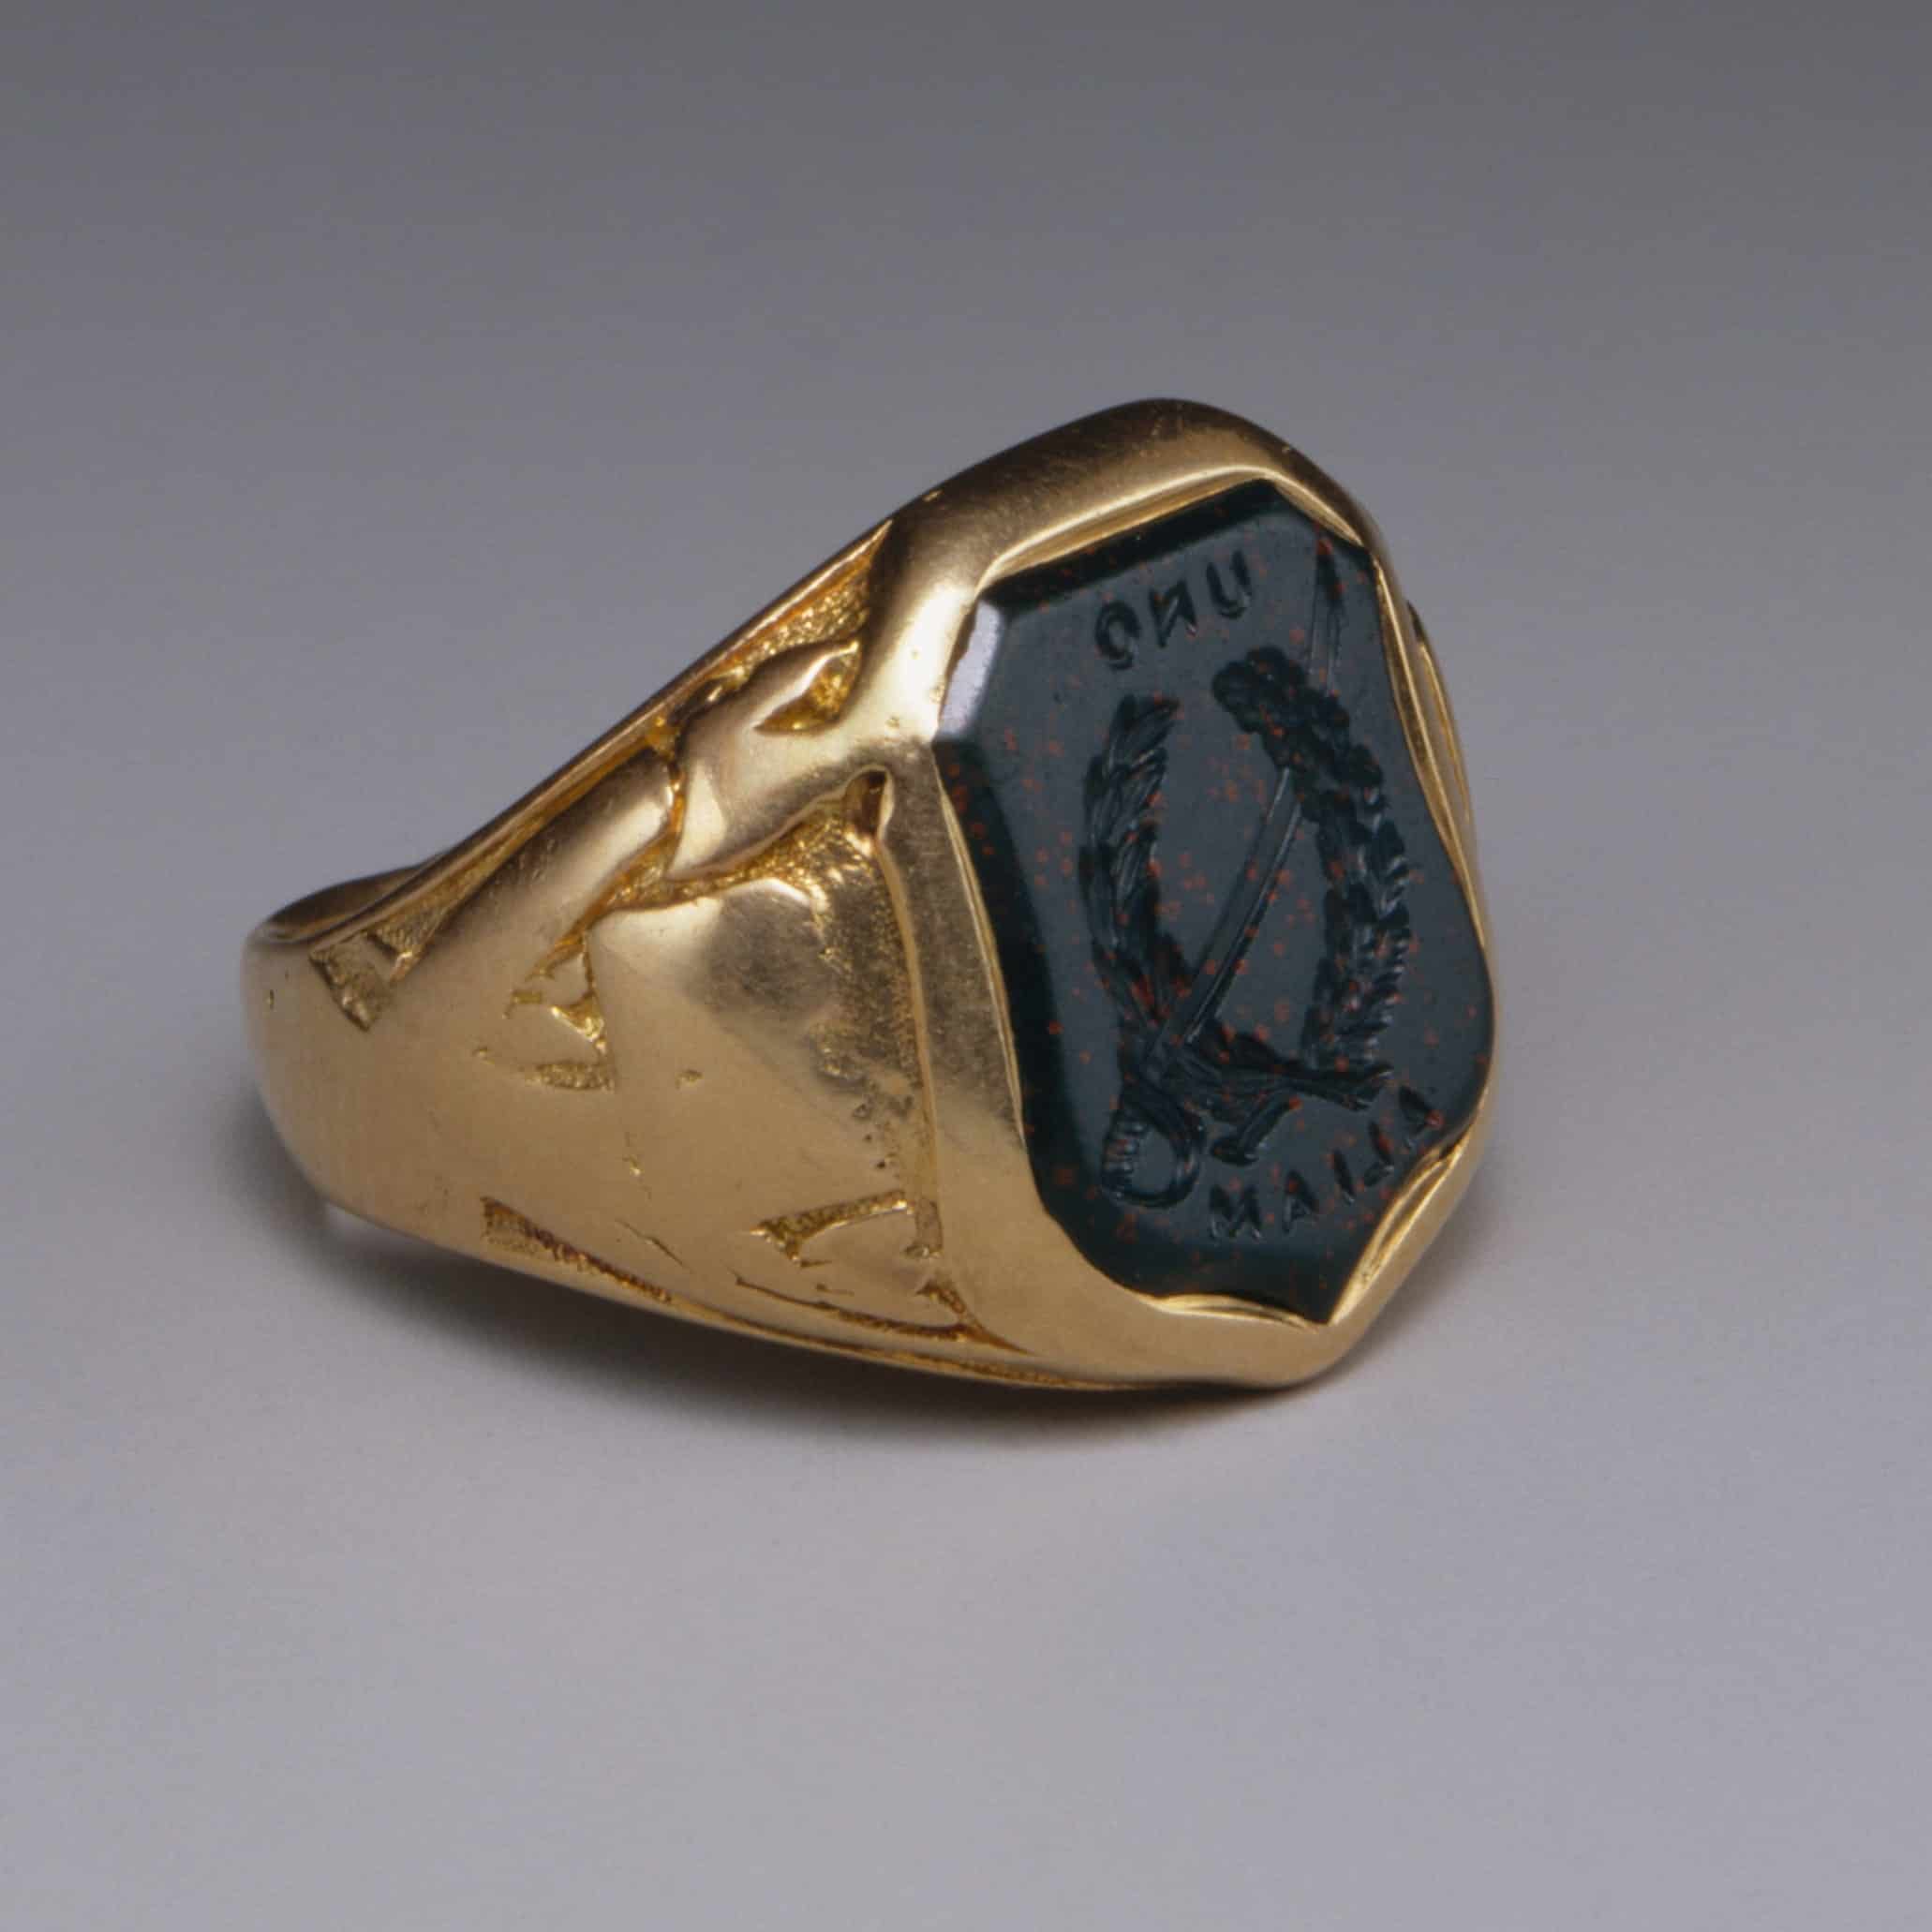 A gold glass ring with a dark stone insert